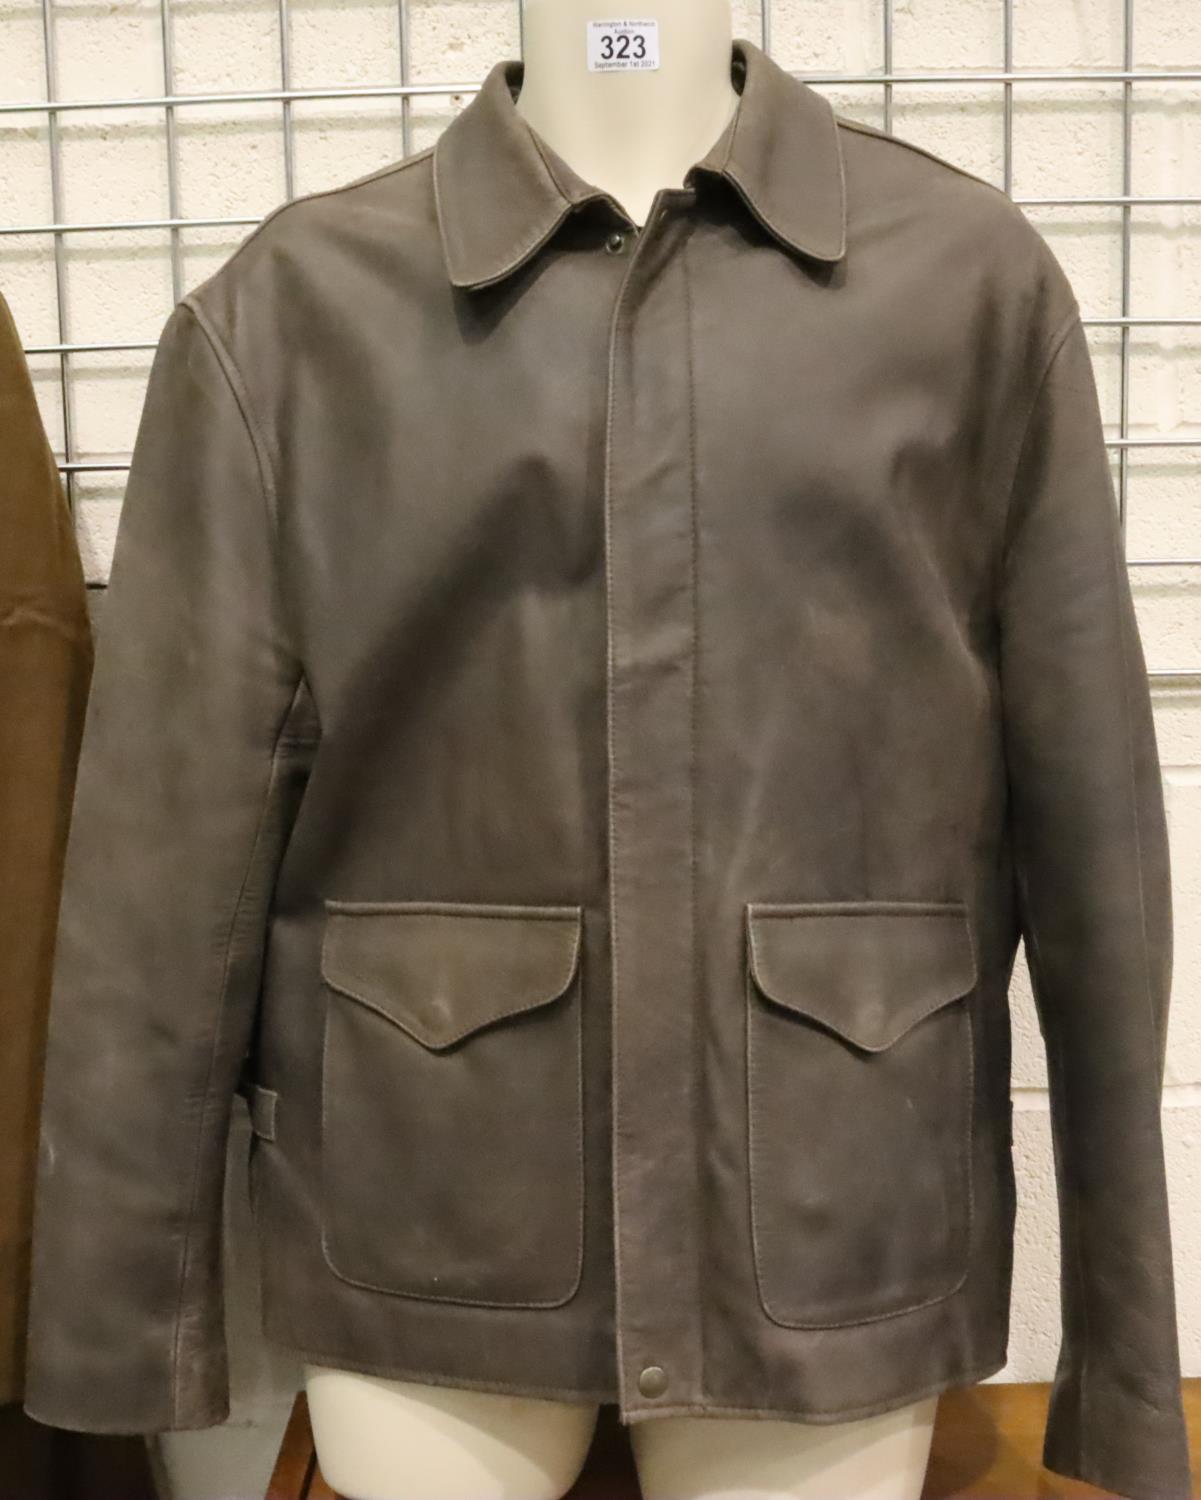 Replica leather jacket after the original as worn by Harrison Ford in Indiana Jones, size 44